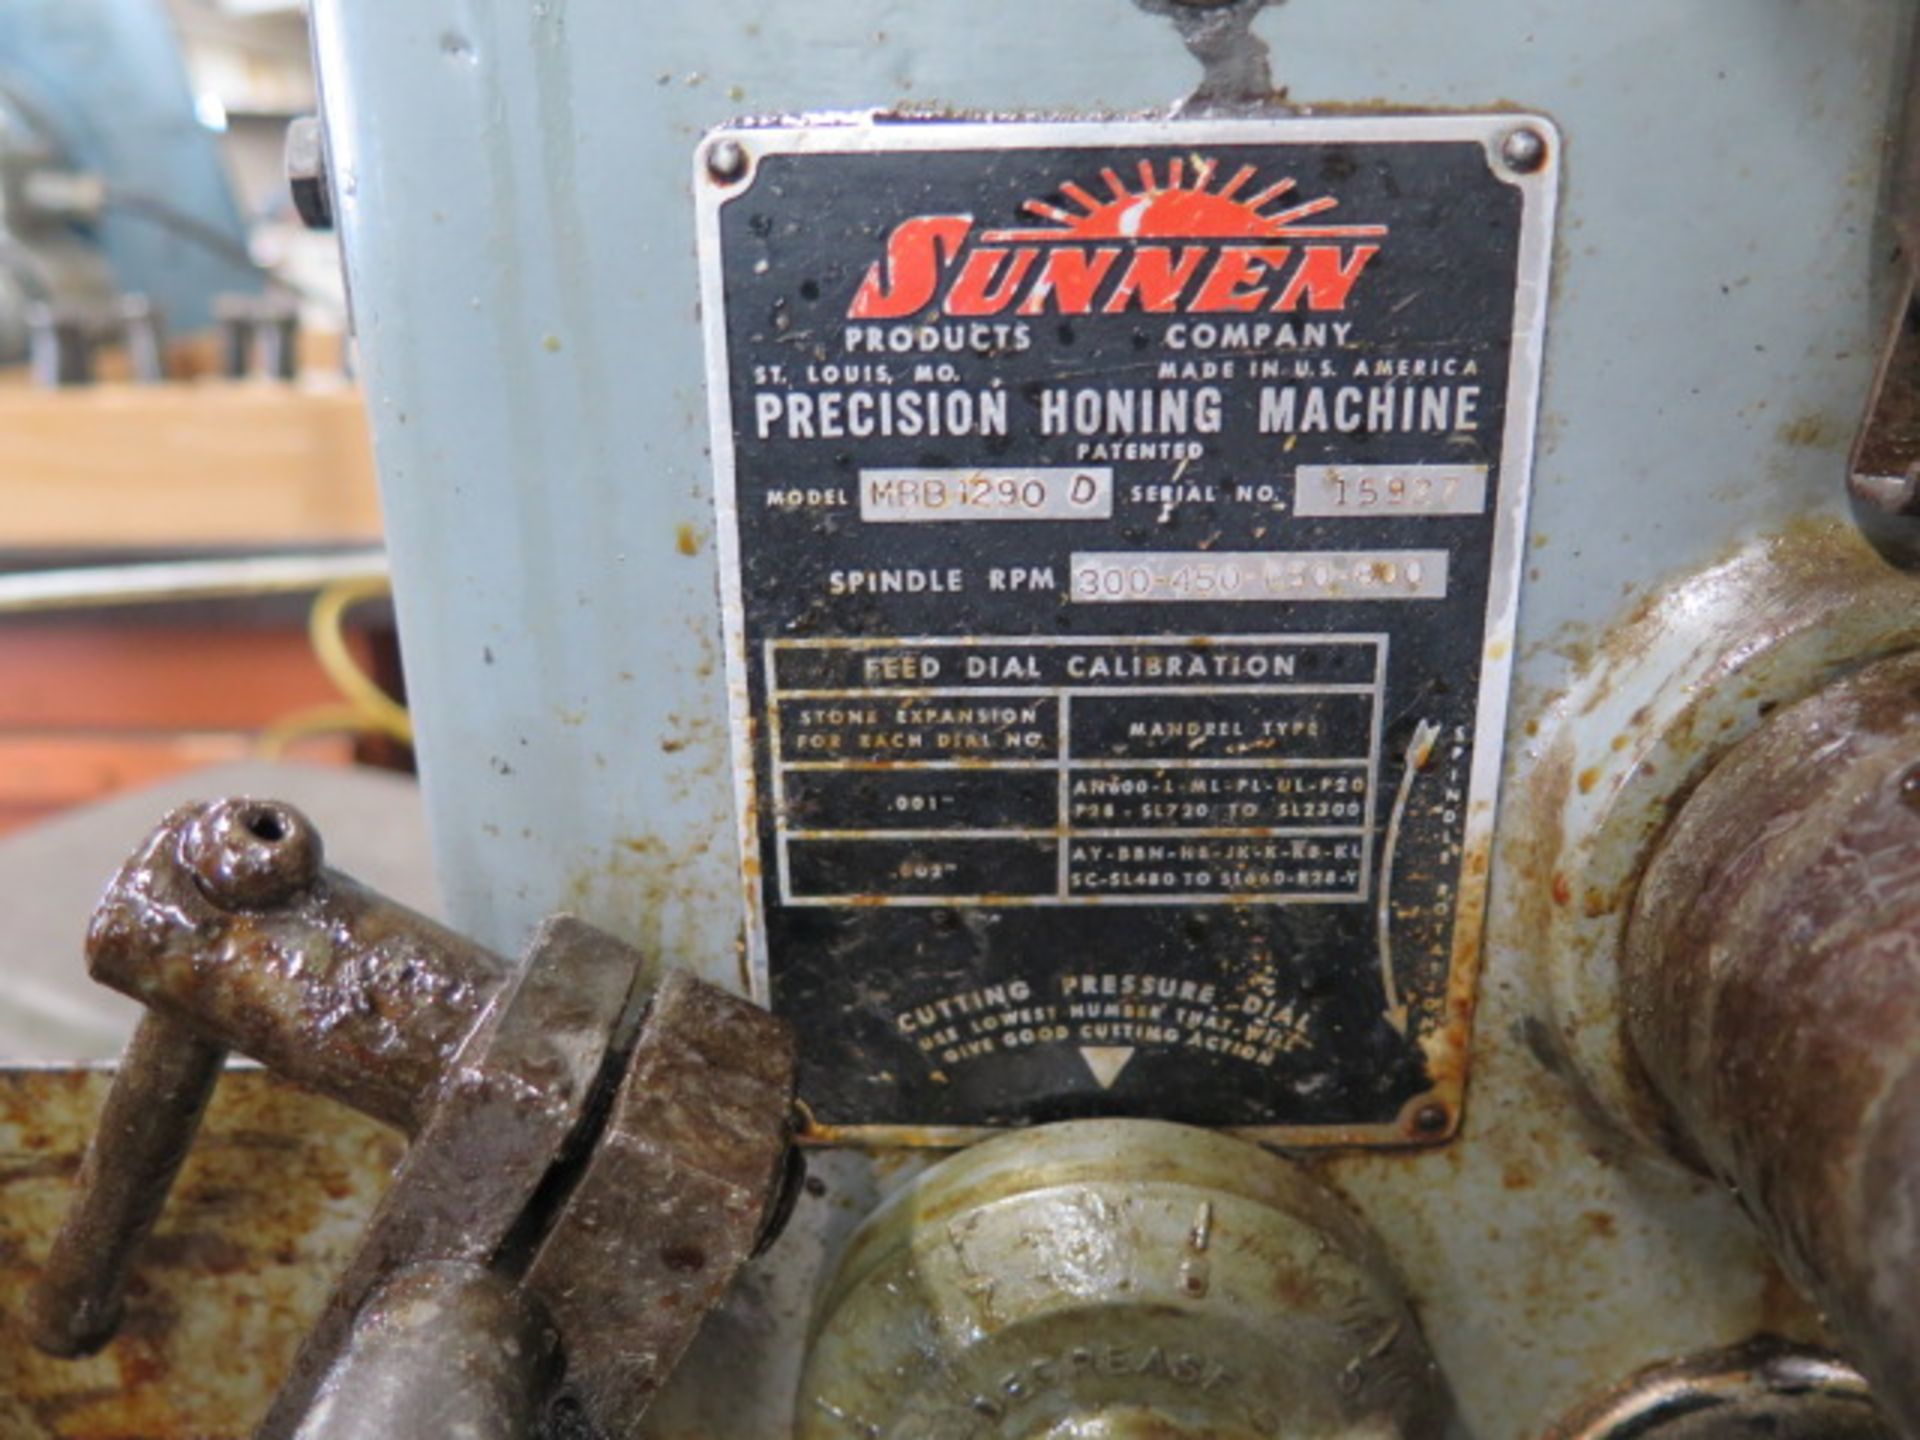 Sunnen MBB-1290D Precision Honing Machine s/n 15927 w/ Coolant (SOLD AS-IS - NO WARRANTY) - Image 7 of 7